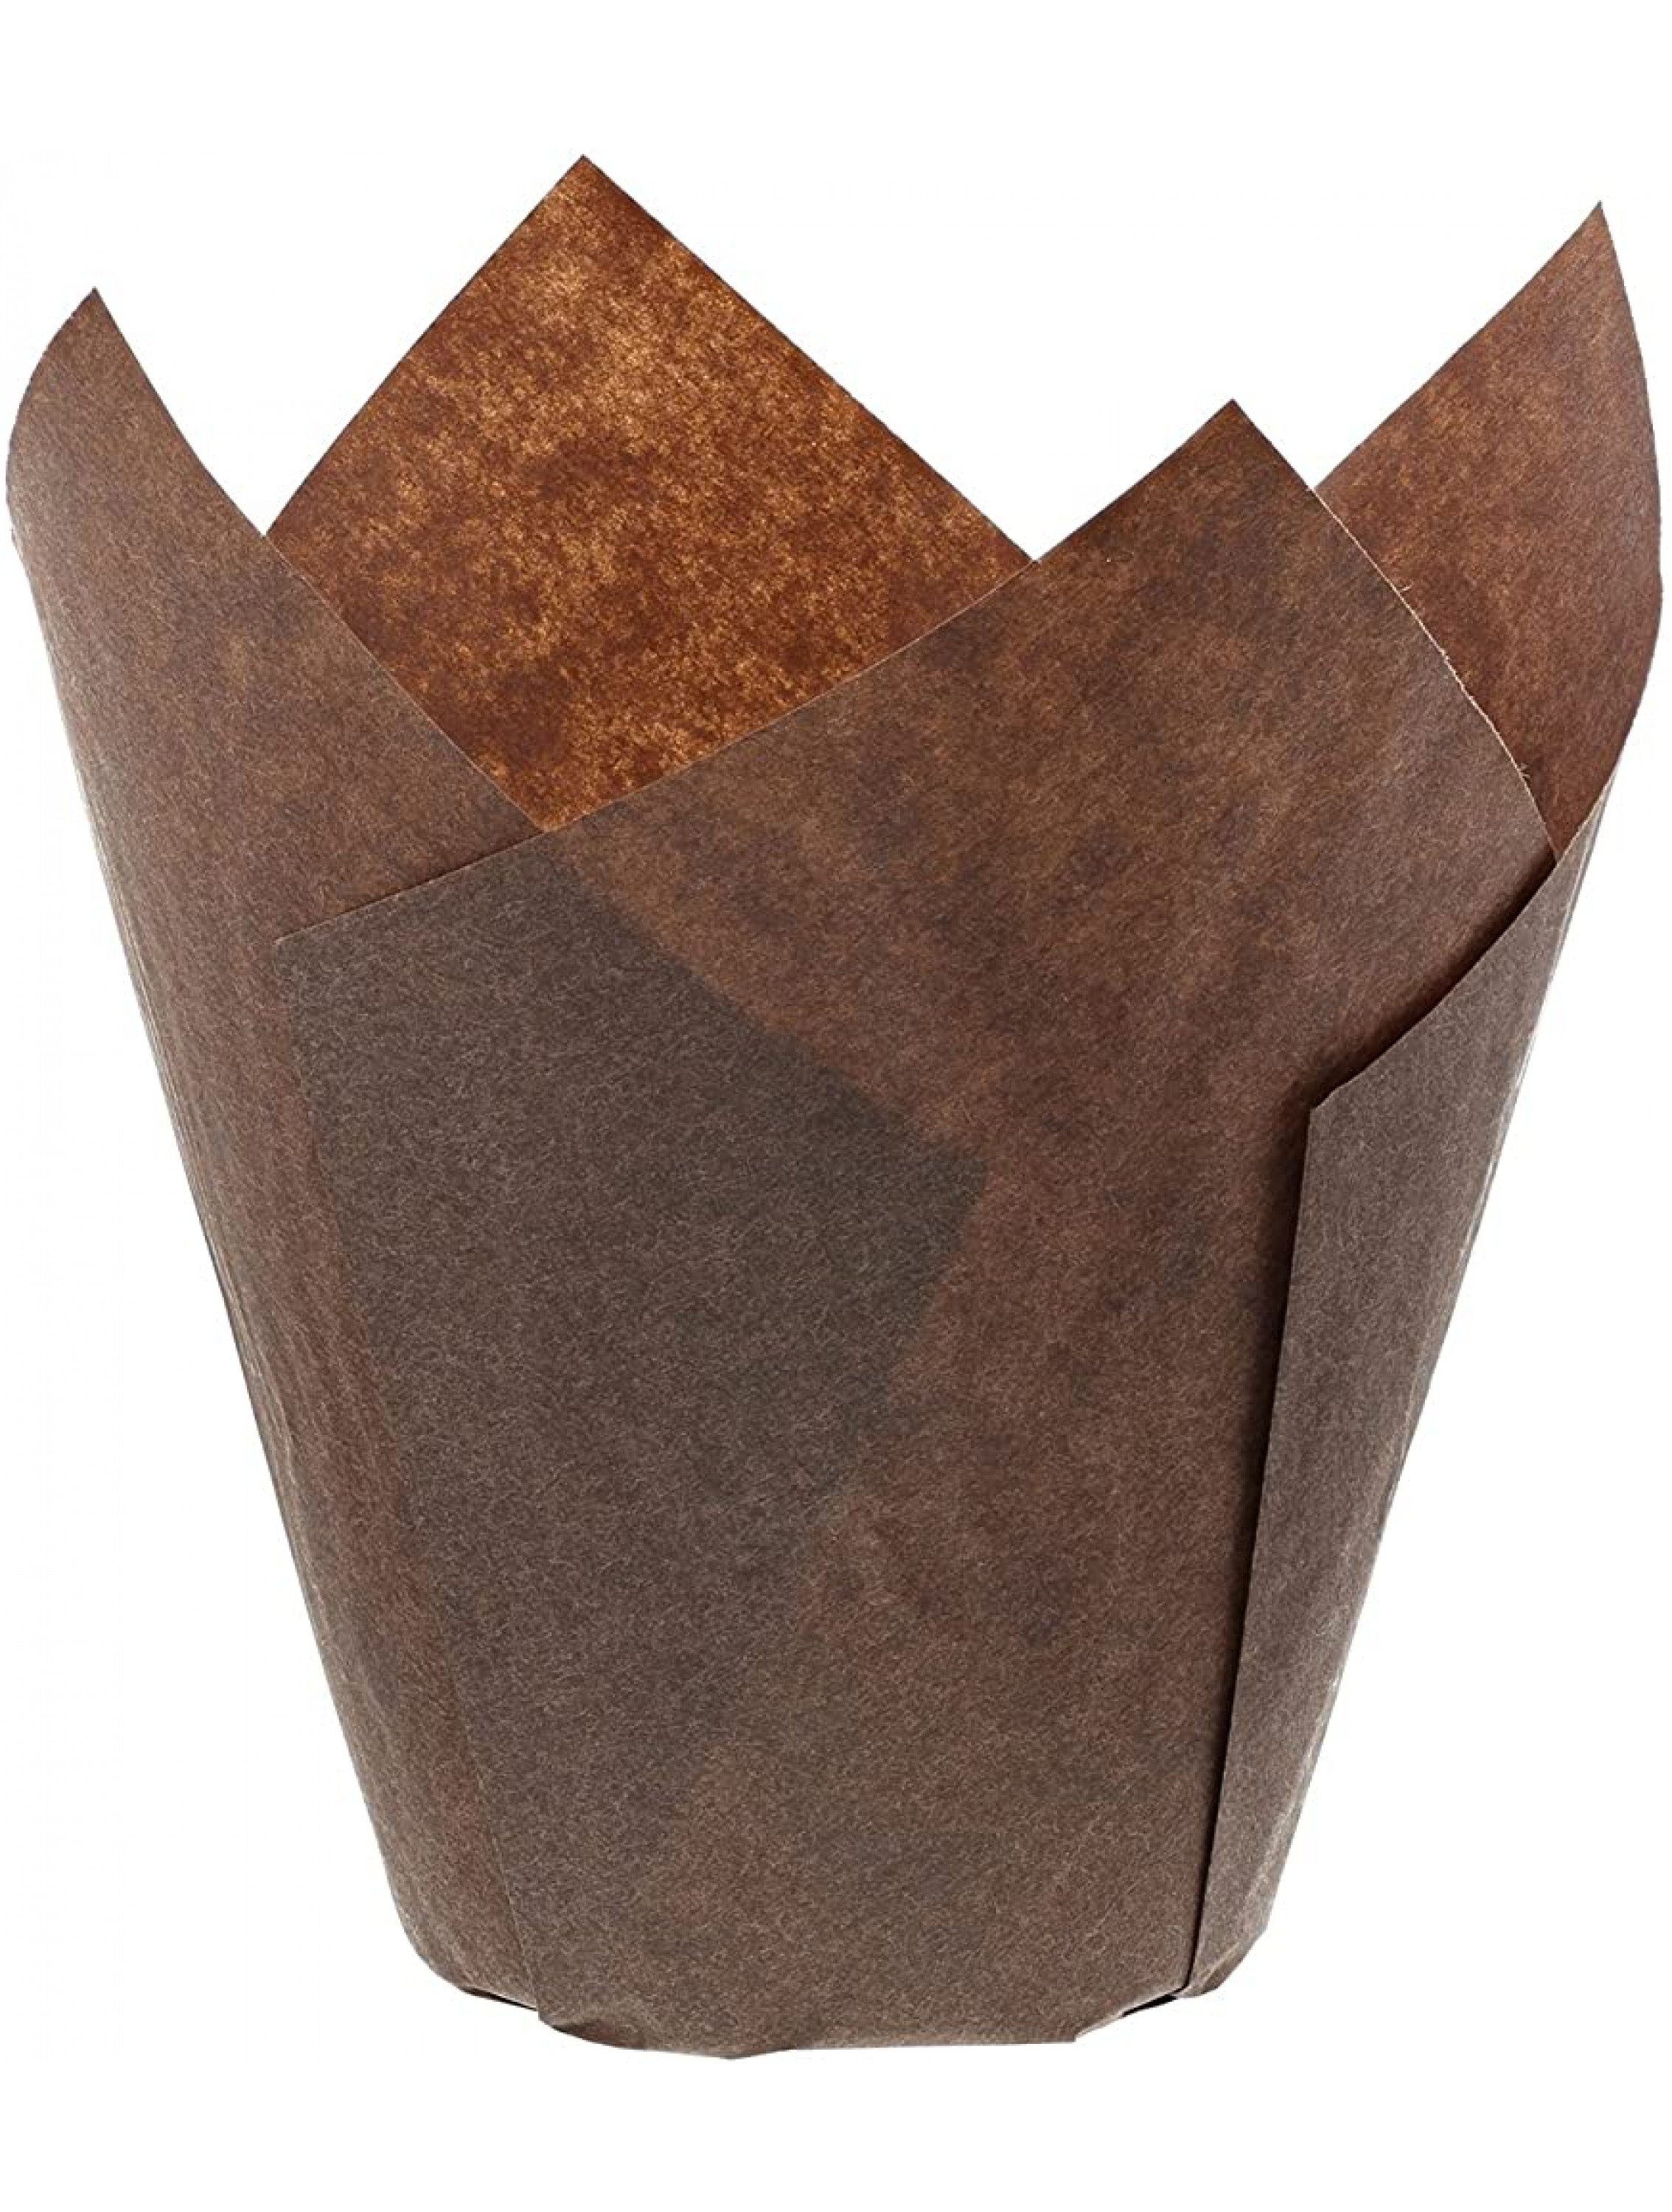 Royal Brown Tulip Style Baking Cups Large Sleeve of 200 - BMI5F5974